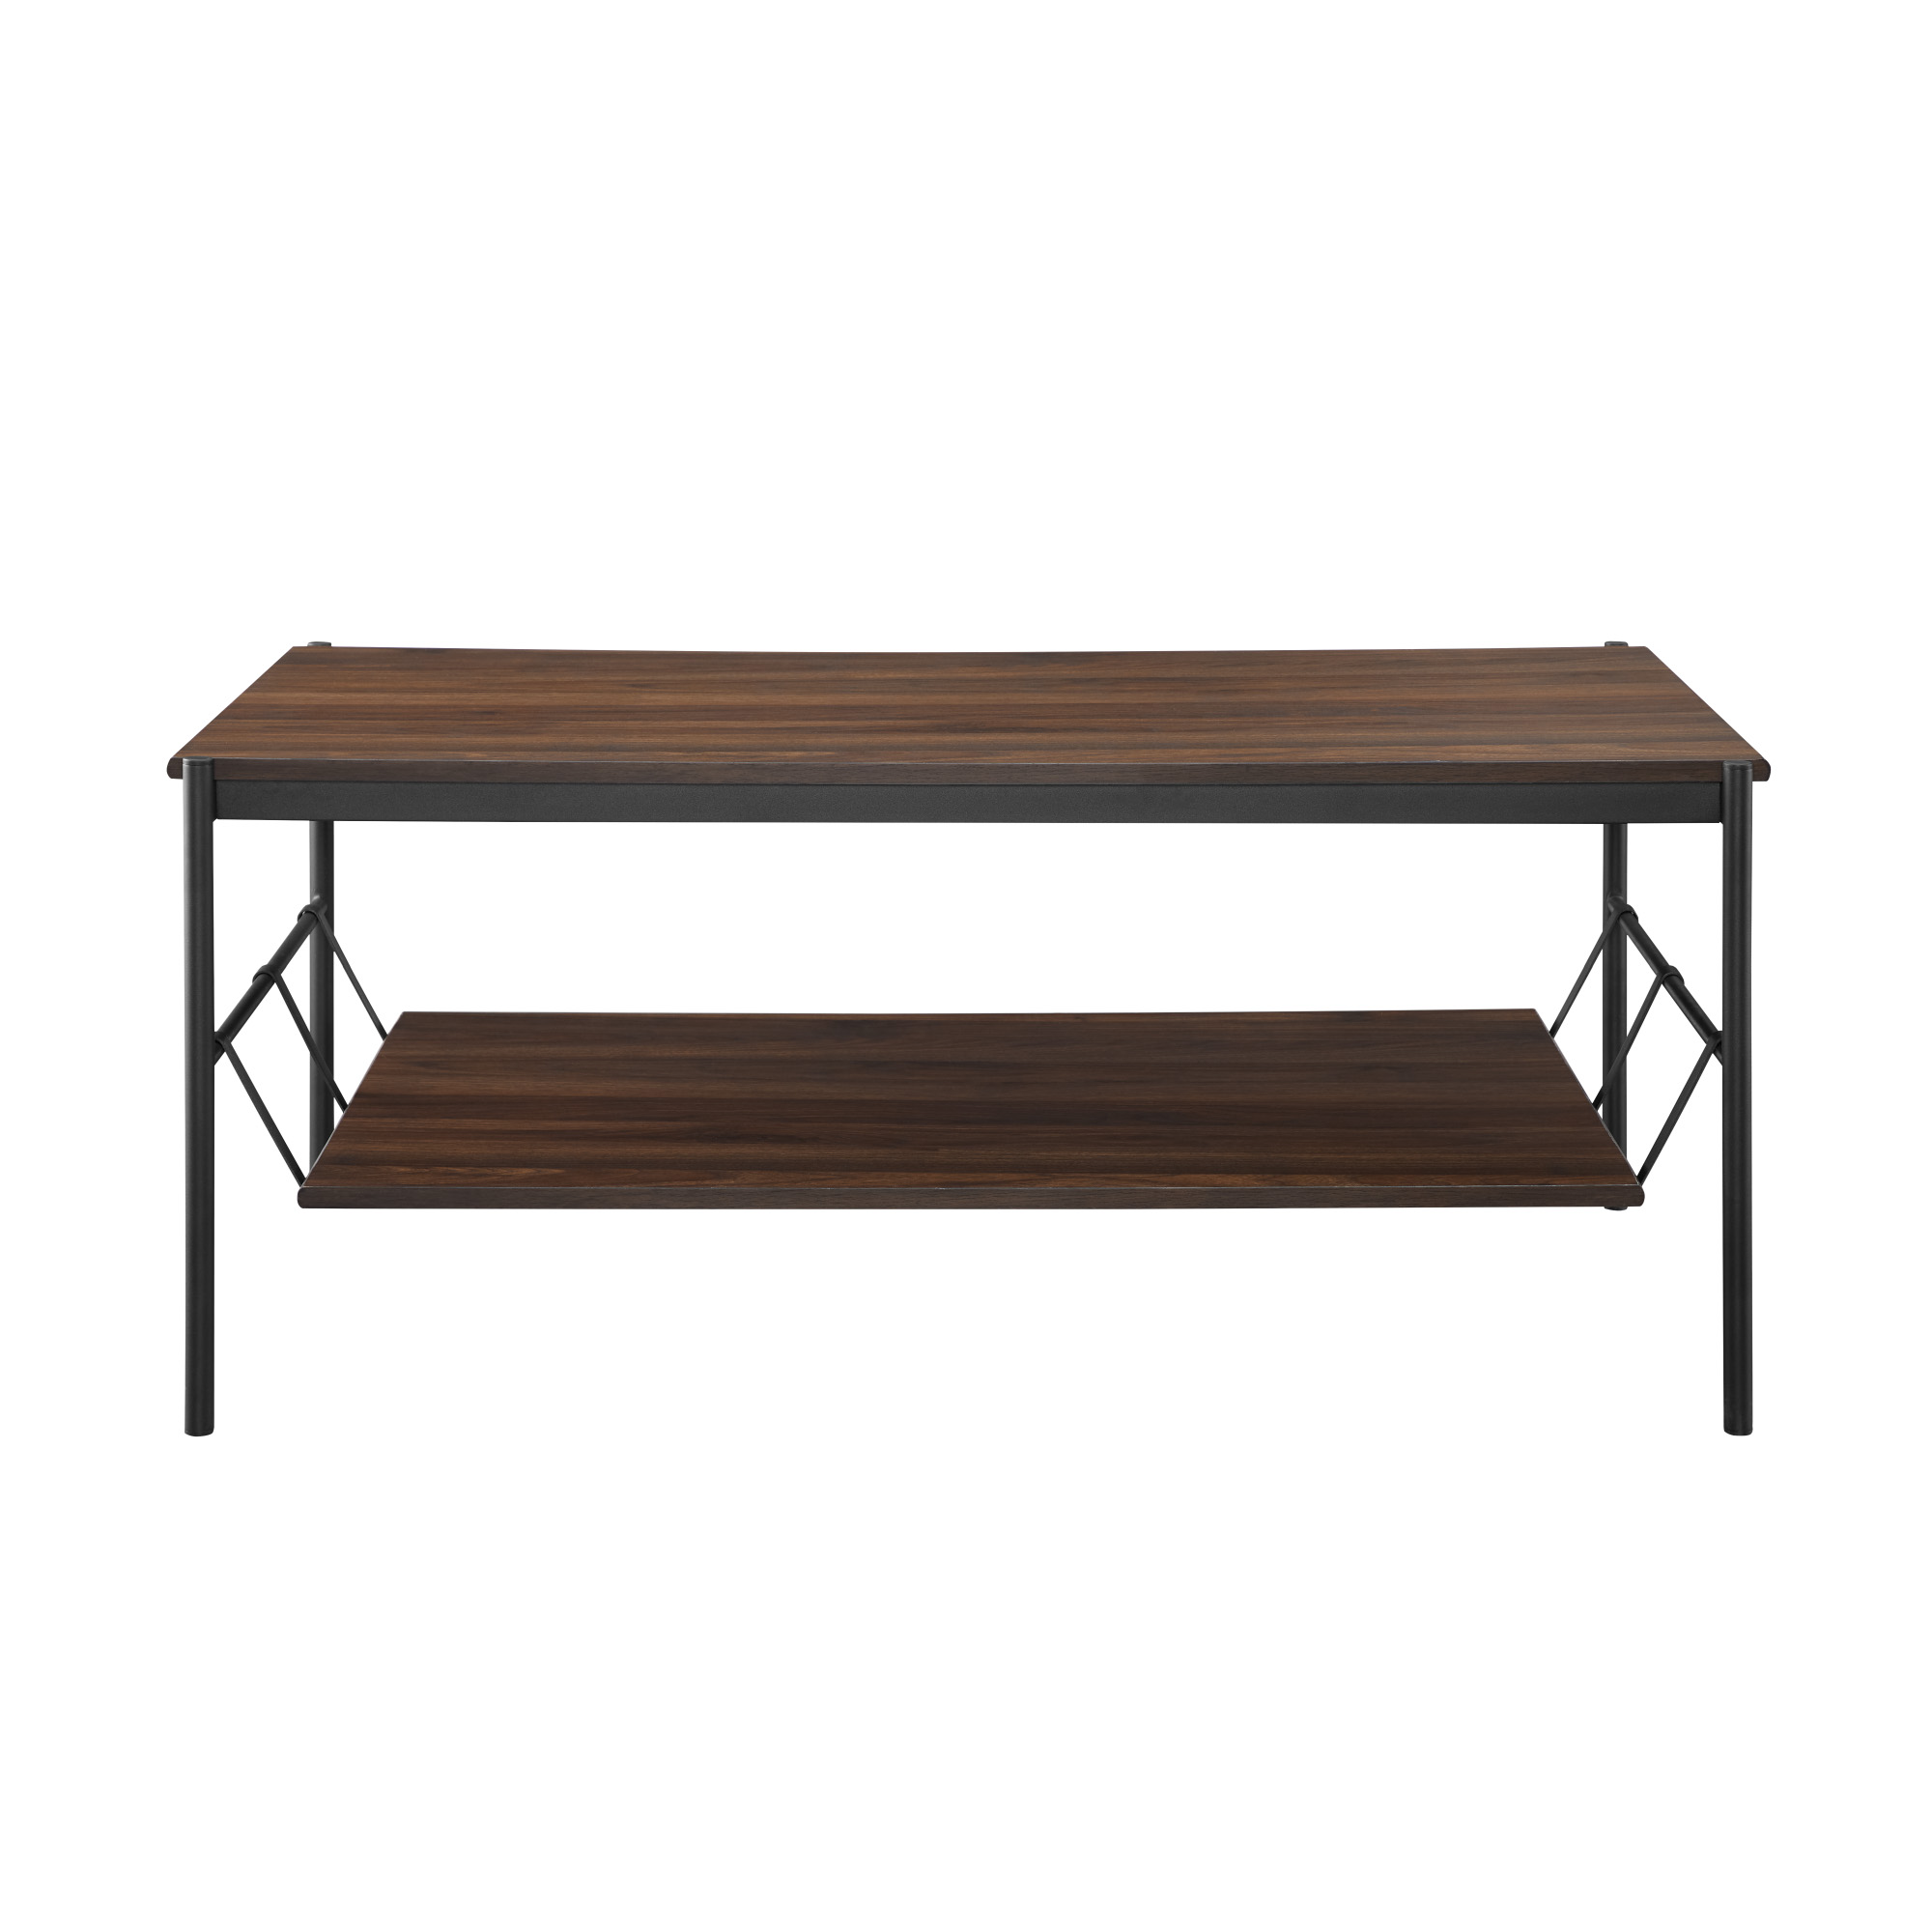 Manor Park Modern Coffee Table with Removable Shelf, Dark Walnut - image 4 of 6